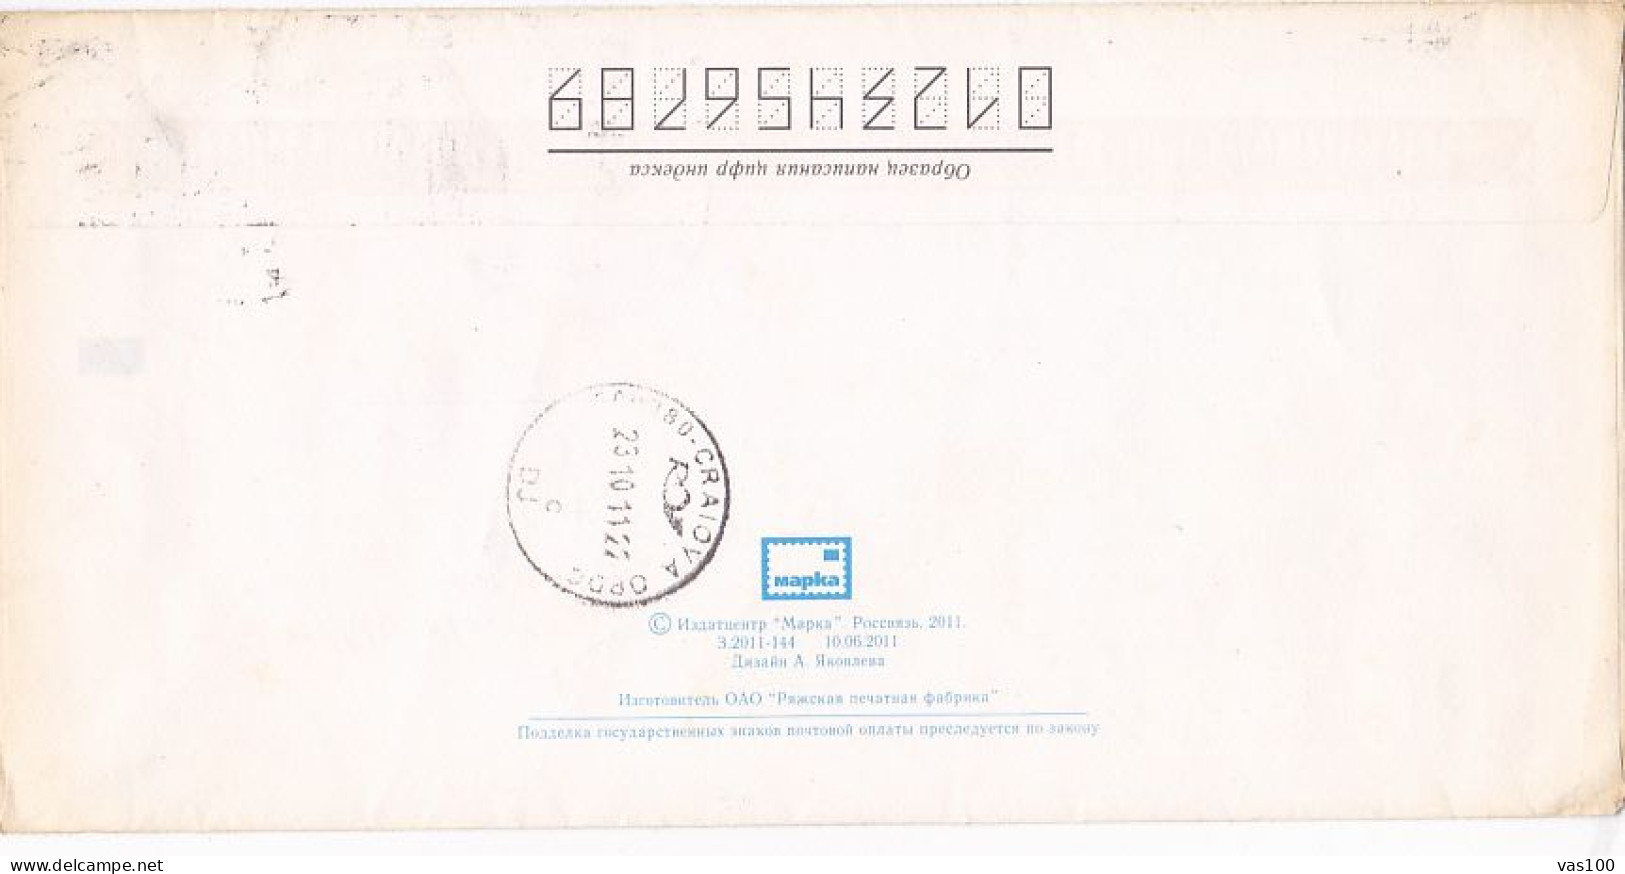 KURSK MONUMENTS, ARCH, STAMP ON INTERNATIONAL LETTER WEEK COVER STATIONERY, ENTIER POSTAL, 2011, RUSSIA - Interi Postali